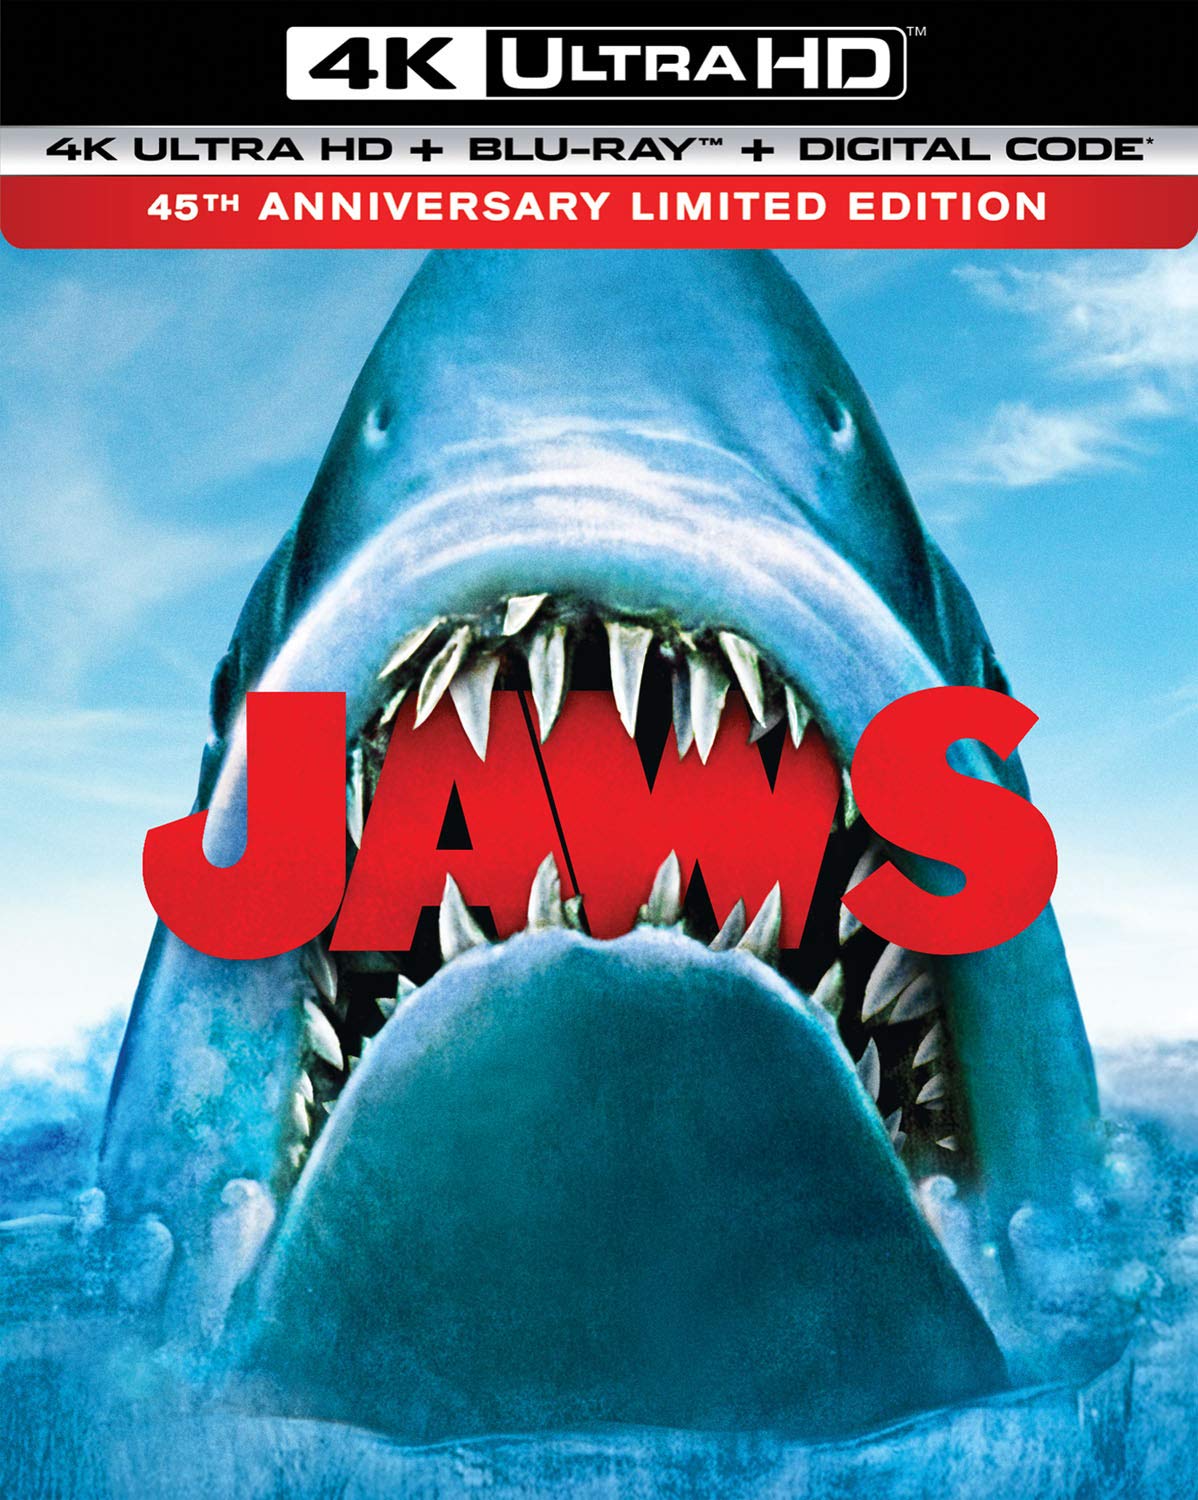 THE BMOVIE NEWS VAULT On June 2nd, Universal Gives JAWS a New 4K